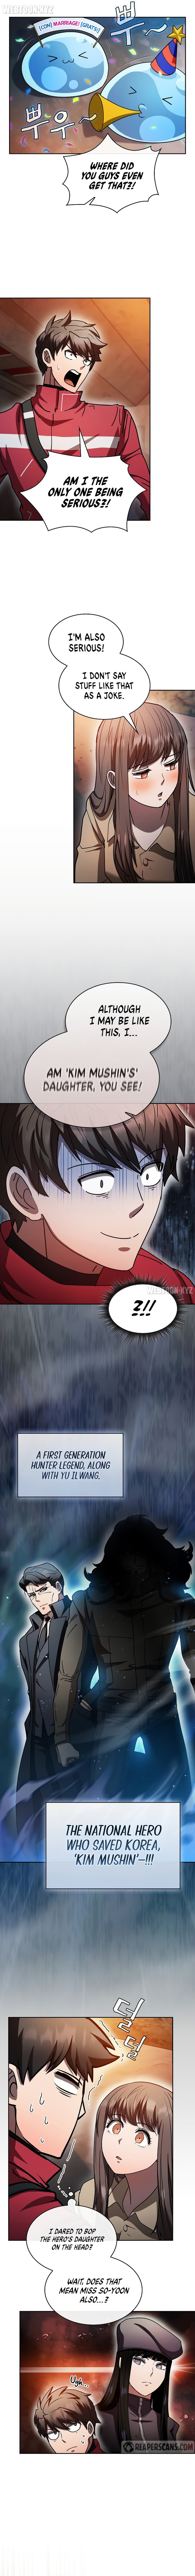 is-this-hunter-for-real-chap-44-4